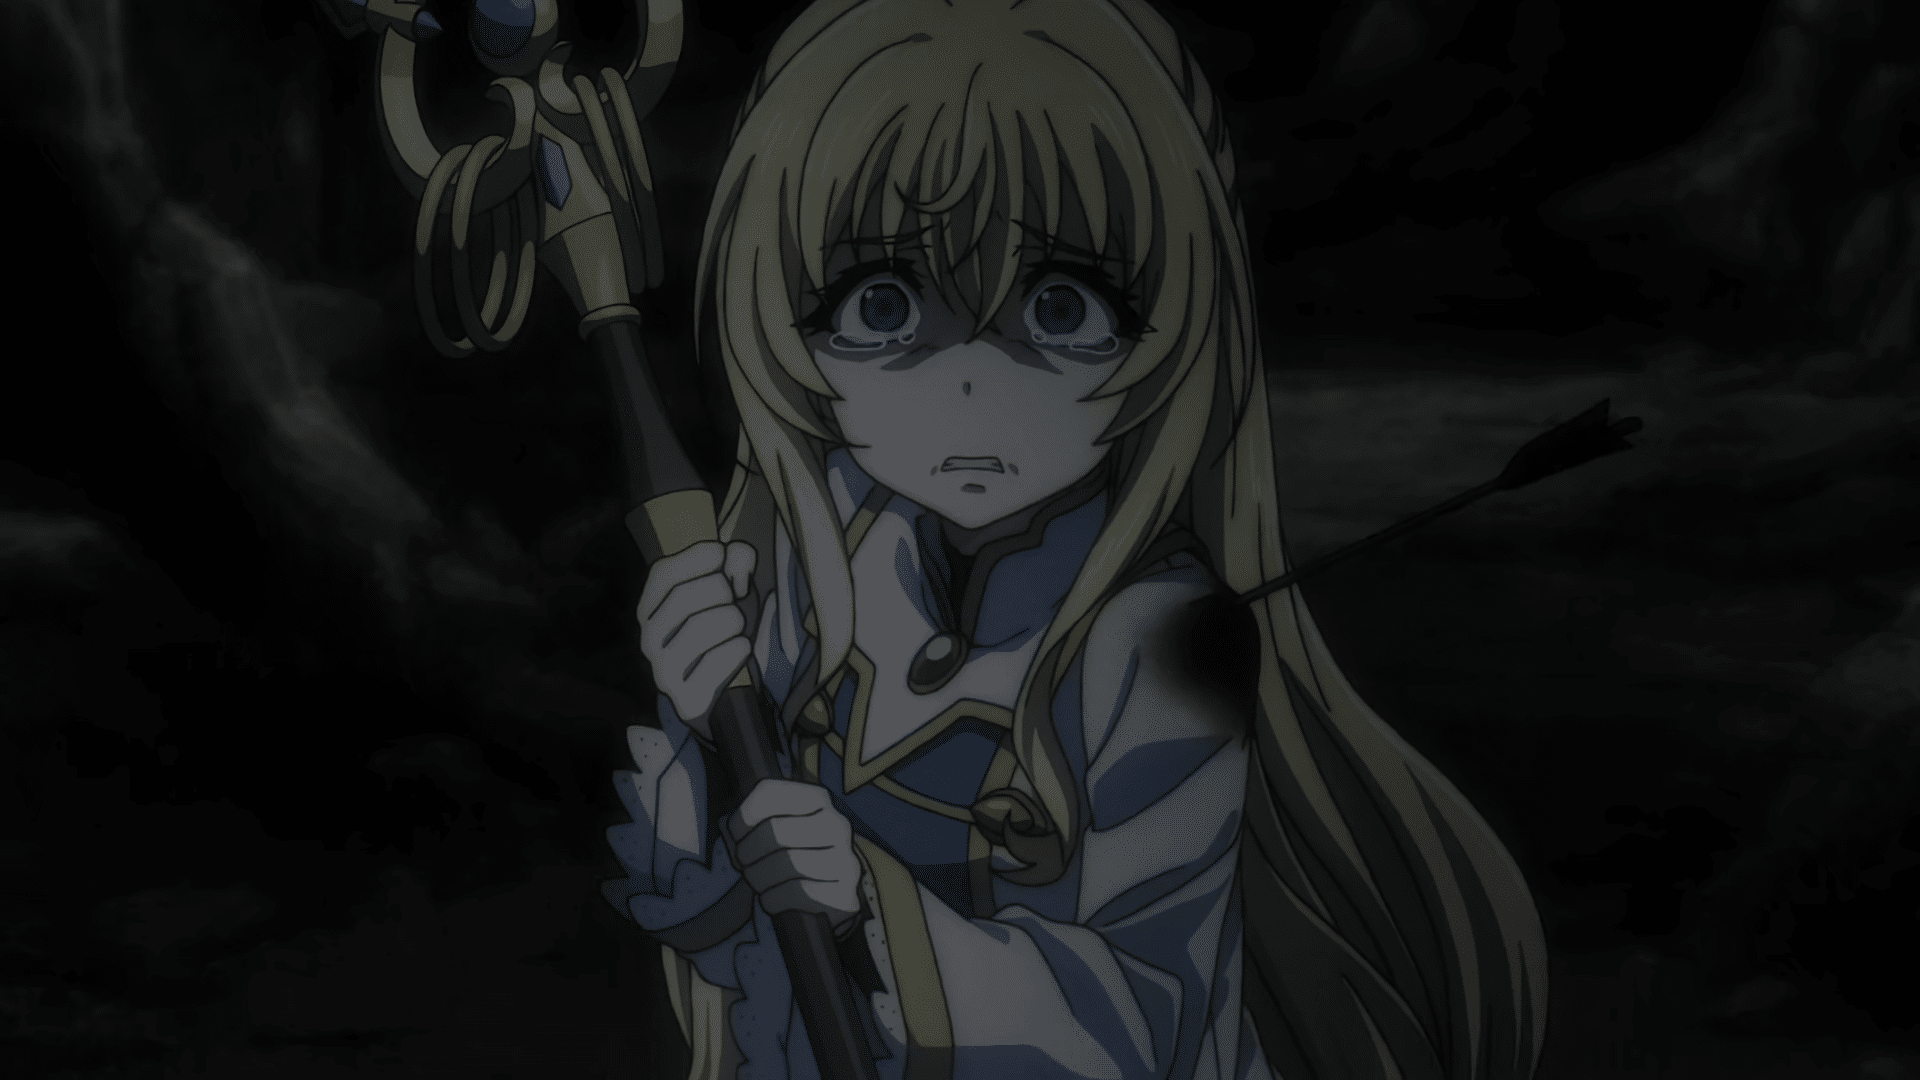 Goblin Slayer Review: Overrated and Underwhelming?